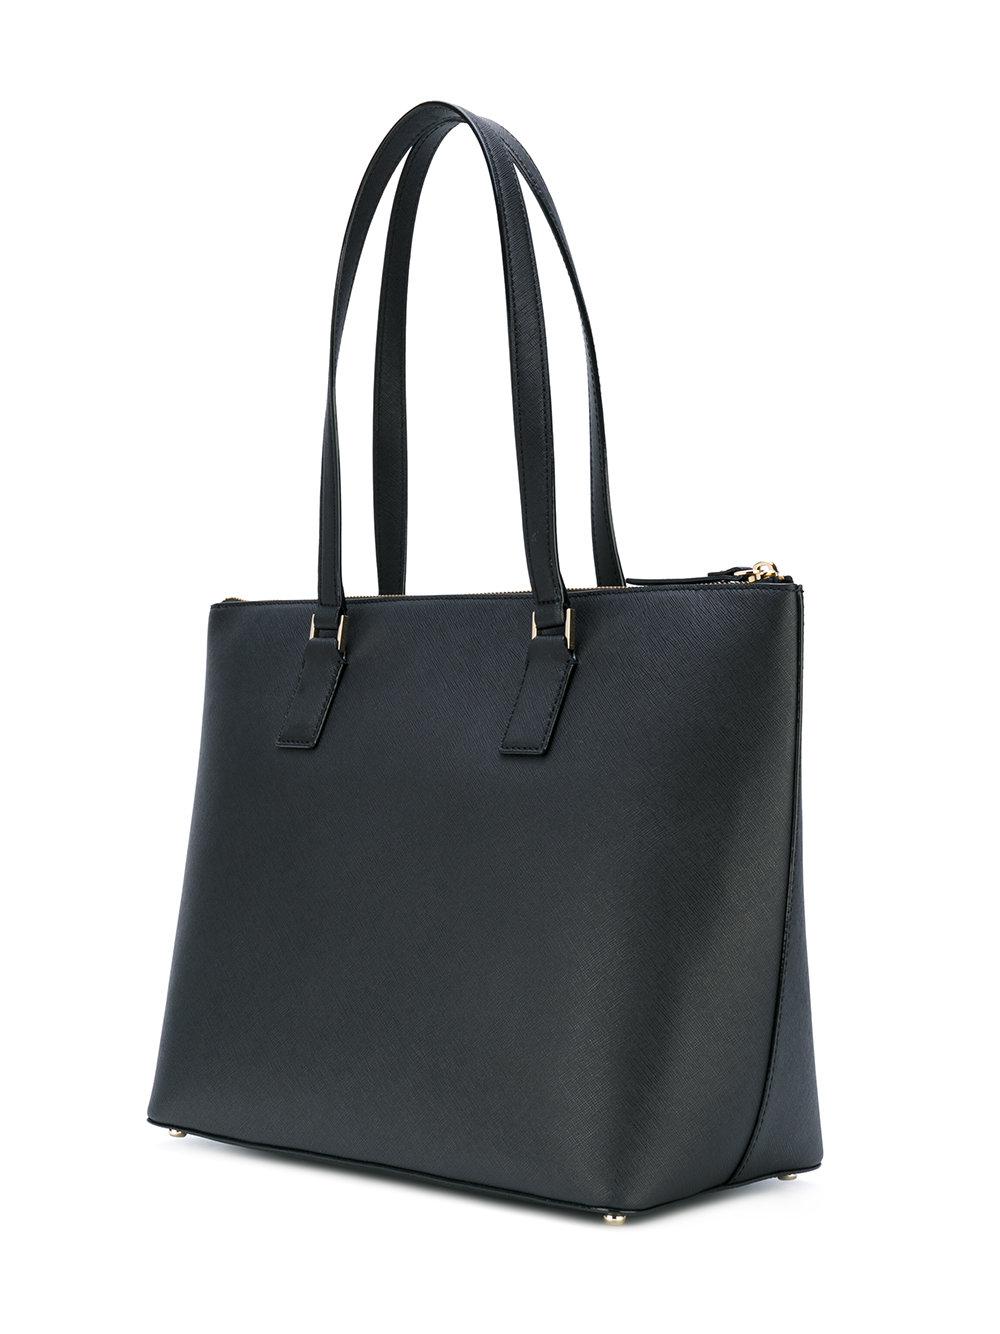 Kate Spade Leather Logo Plaque Tote Bag in Black - Lyst